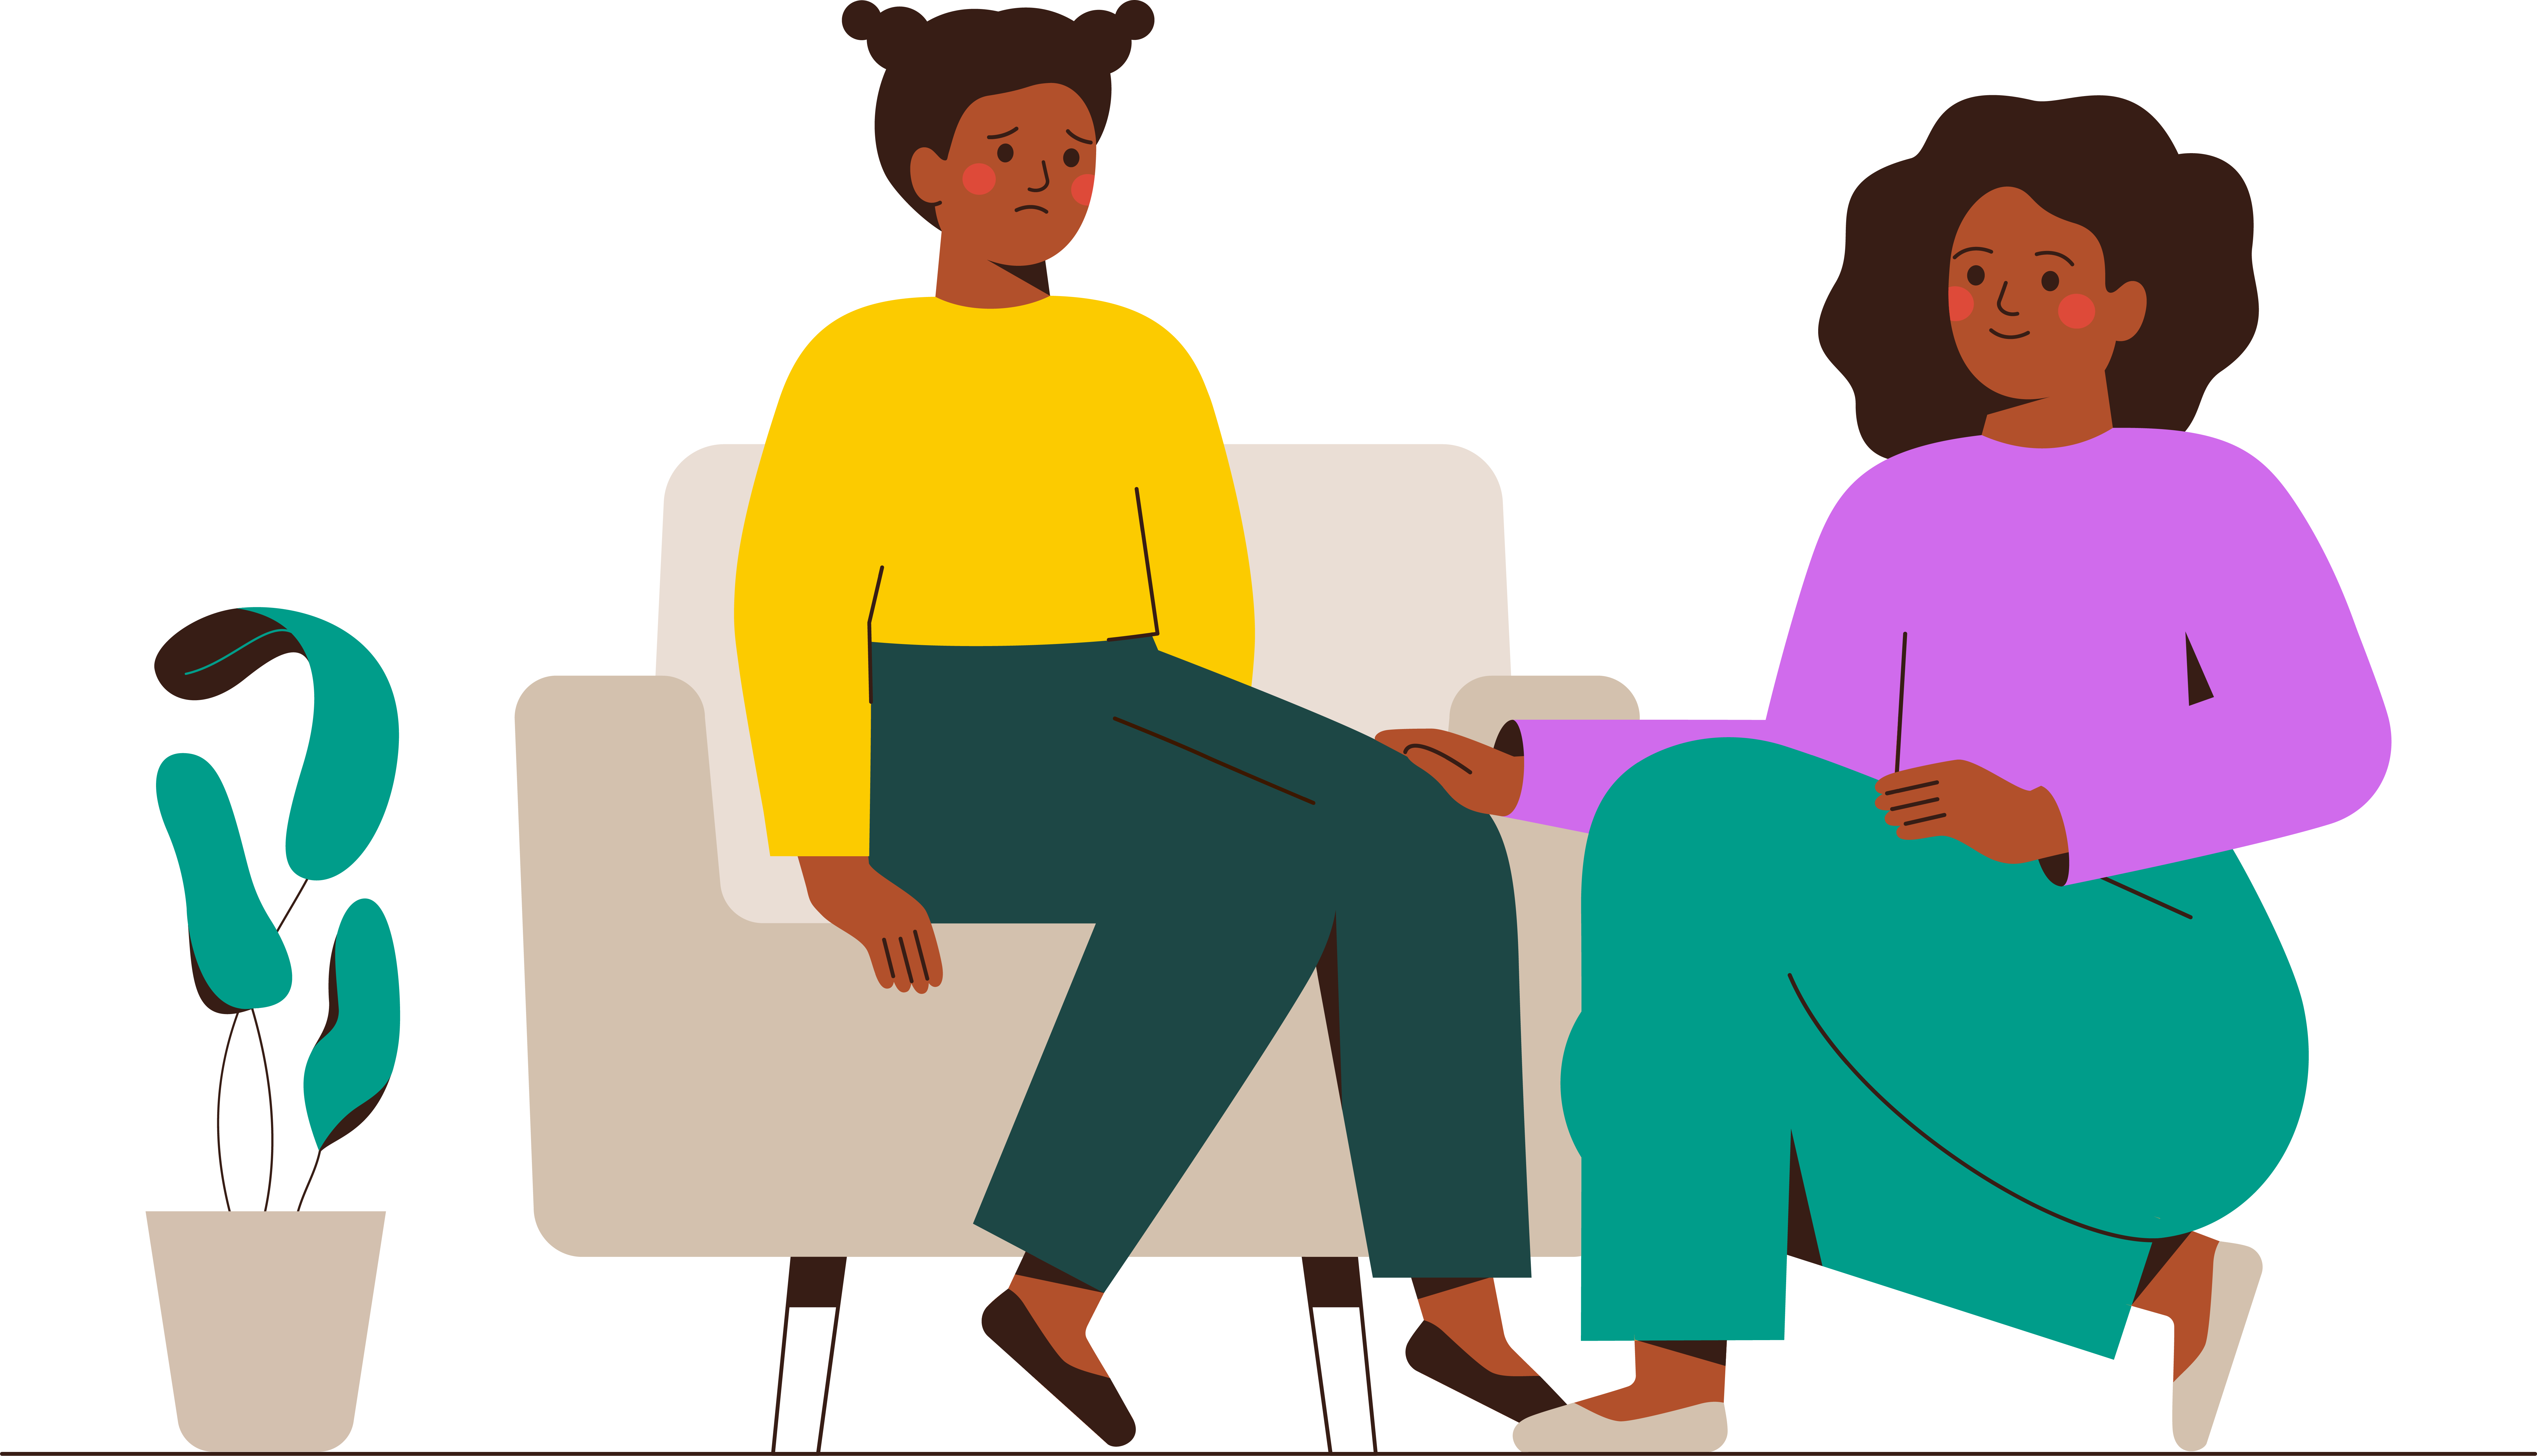 Illustration of woman on couch and another woman kneeling beside